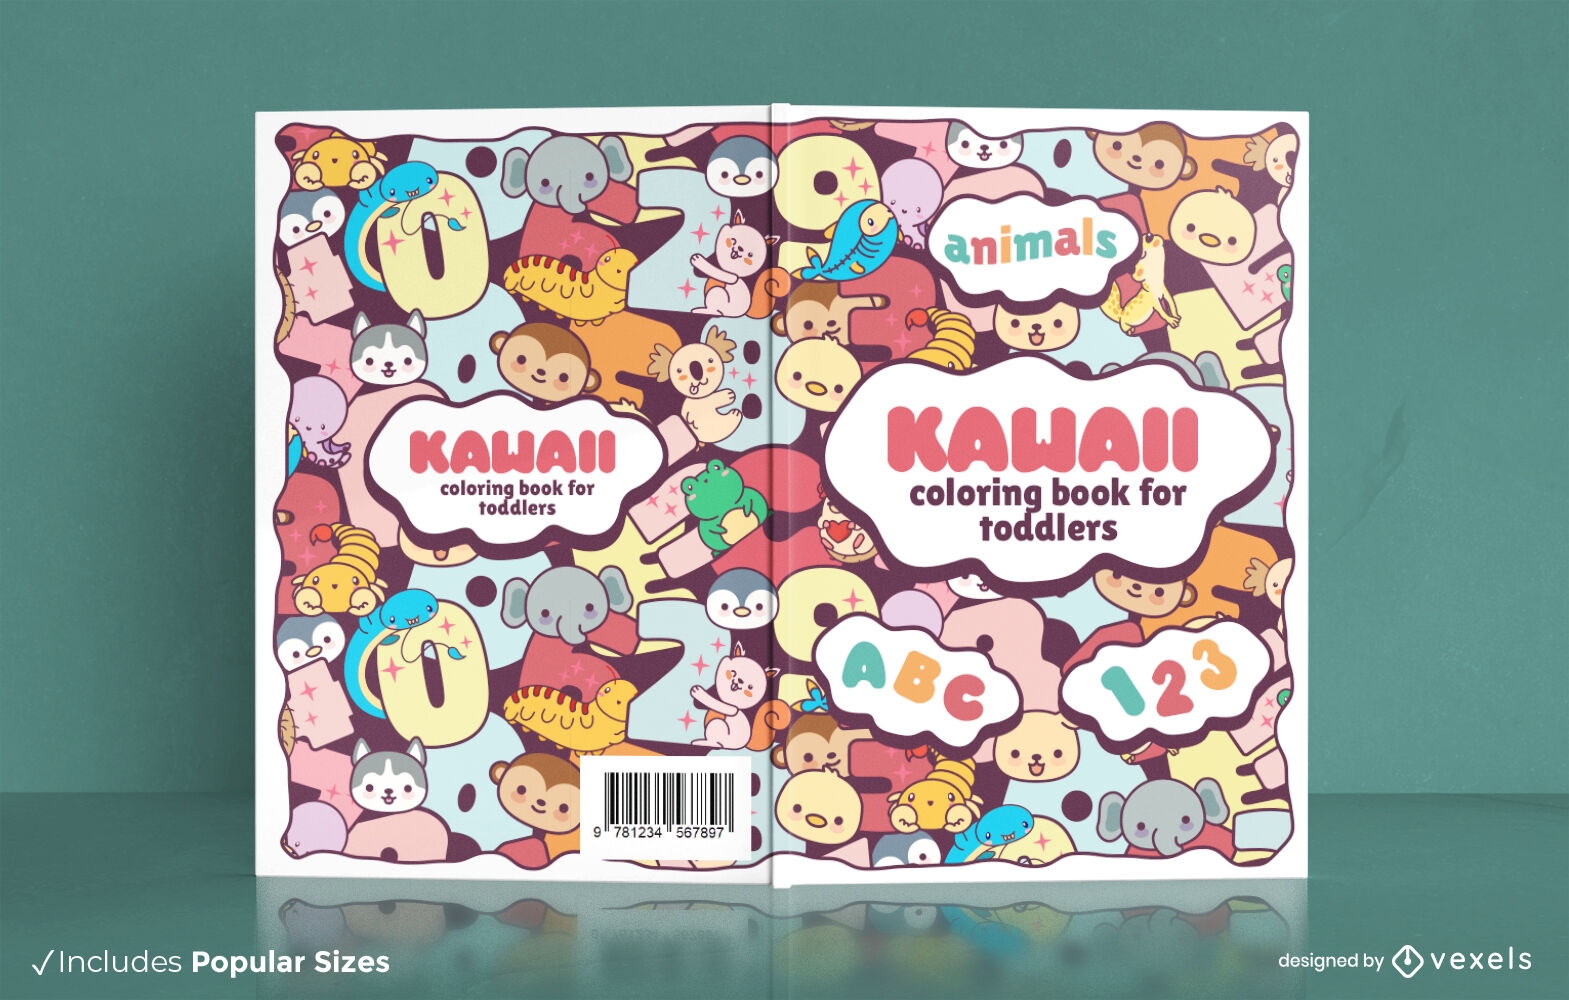 Kawaii animals for toddlers book cover design